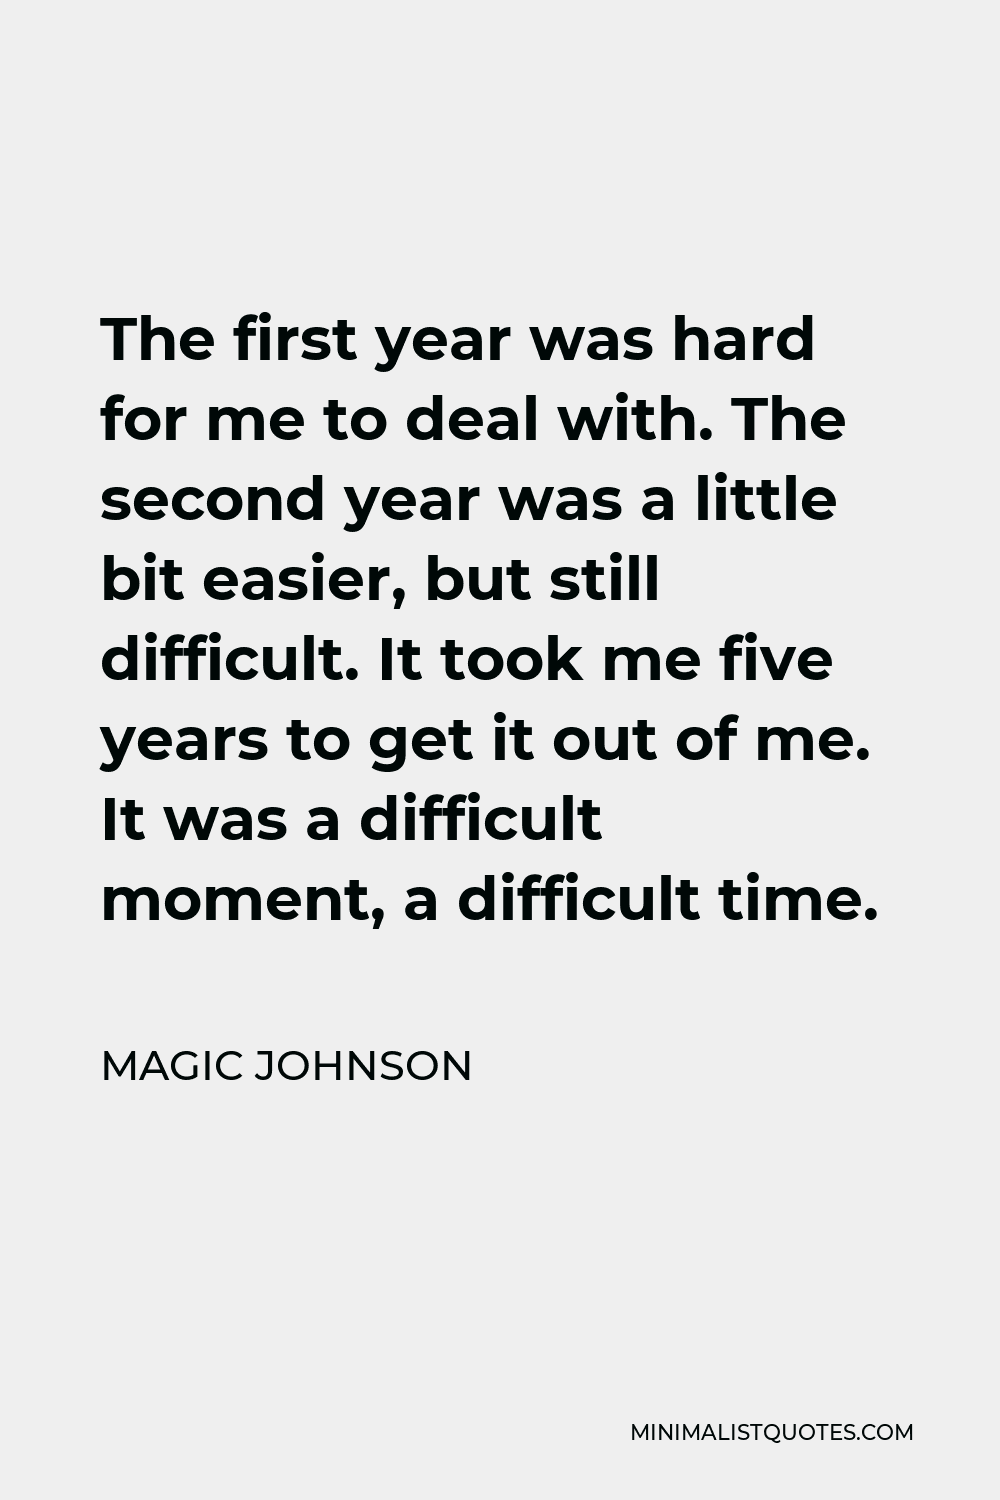 Magic Johnson Quote - The first year was hard for me to deal with. The second year was a little bit easier, but still difficult. It took me five years to get it out of me. It was a difficult moment, a difficult time.